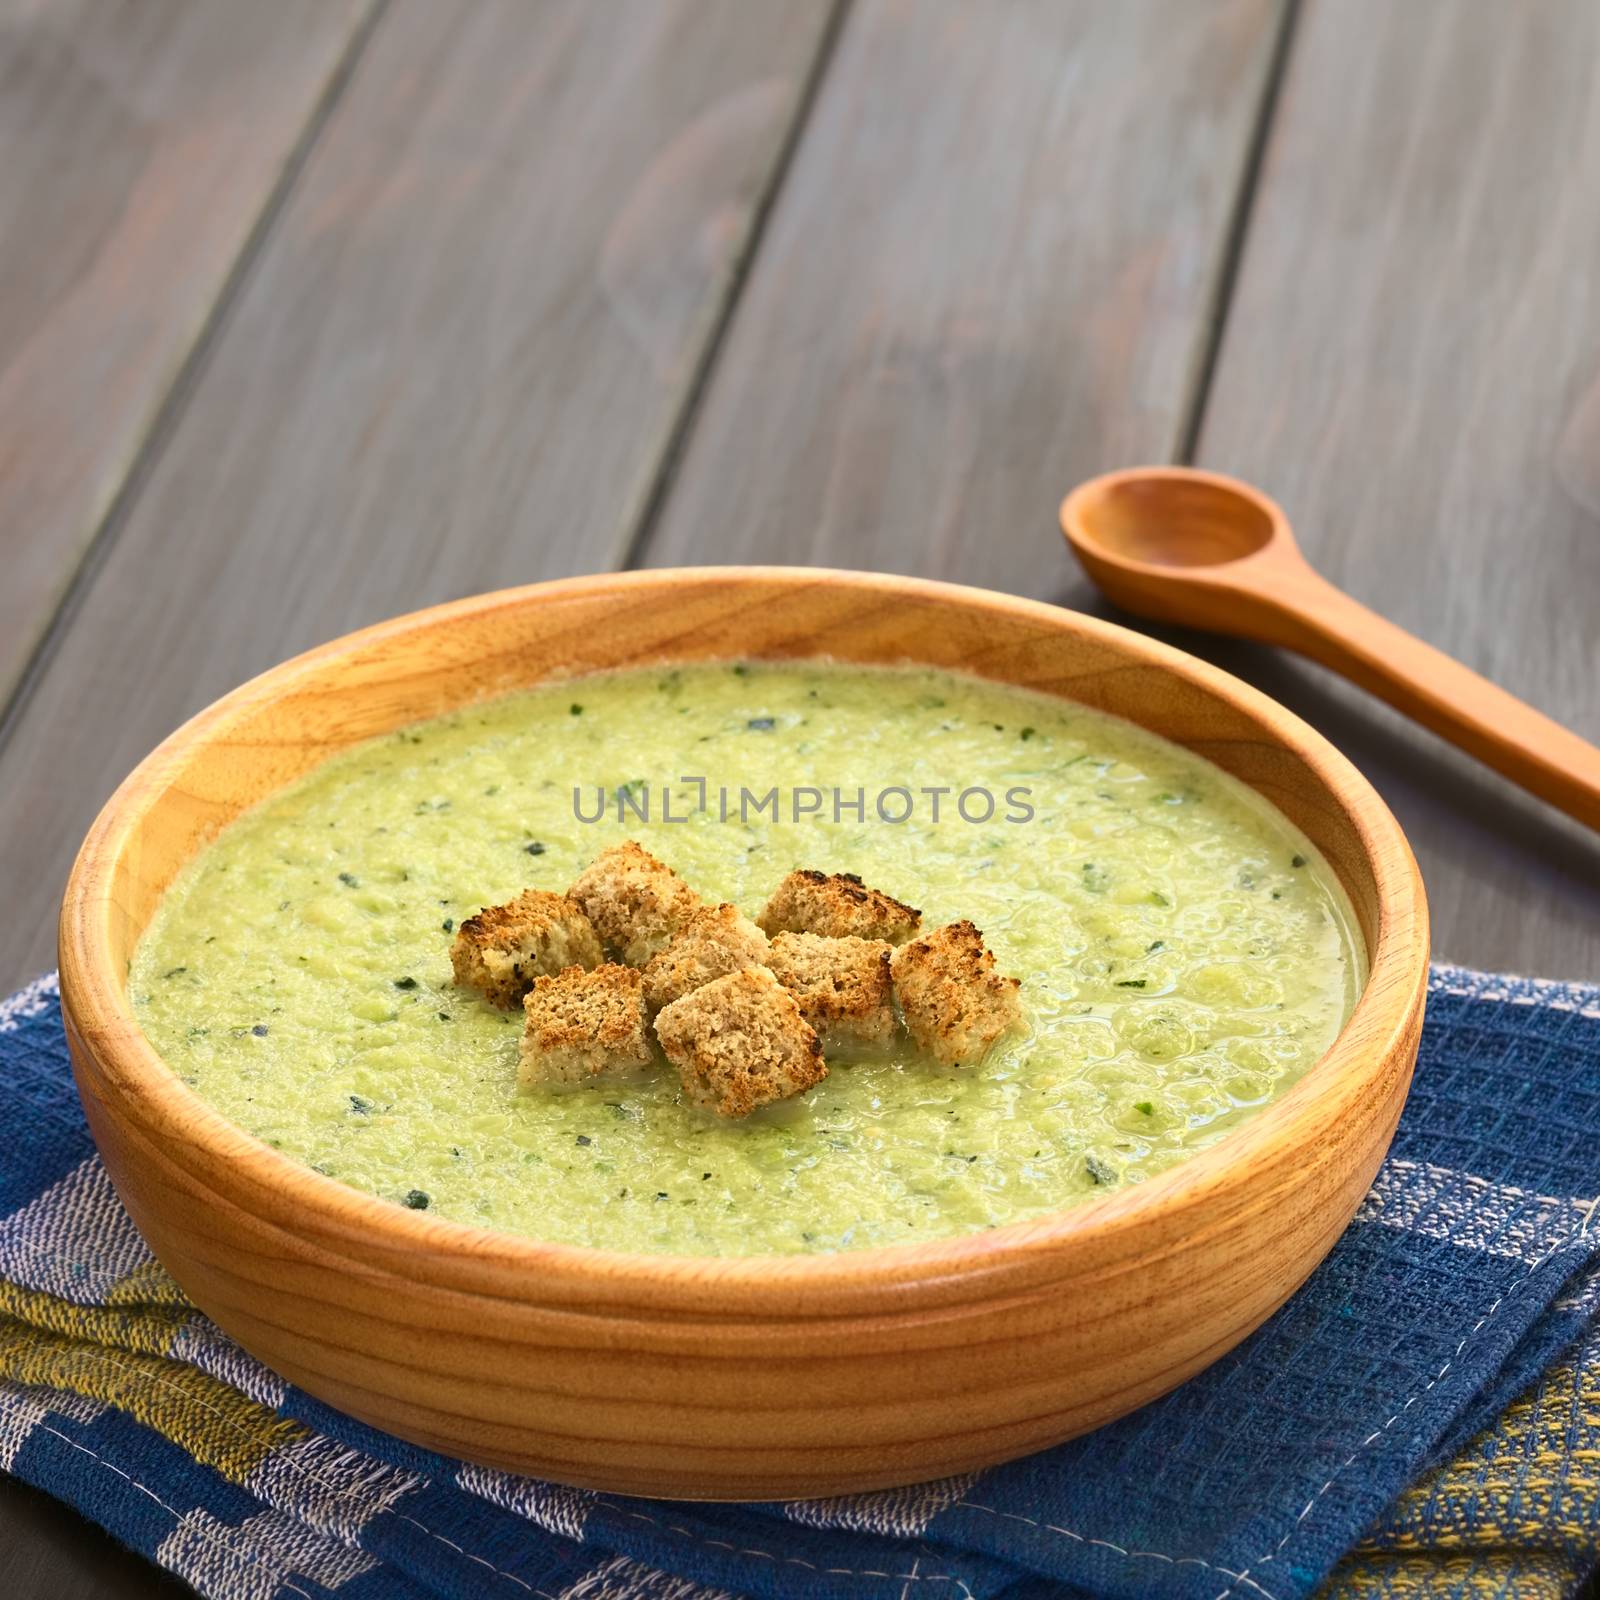 Cream of zucchini soup in wooden bowl with homemade croutons on top, photographed with natural light (Selective Focus, Focus on the first croutons)